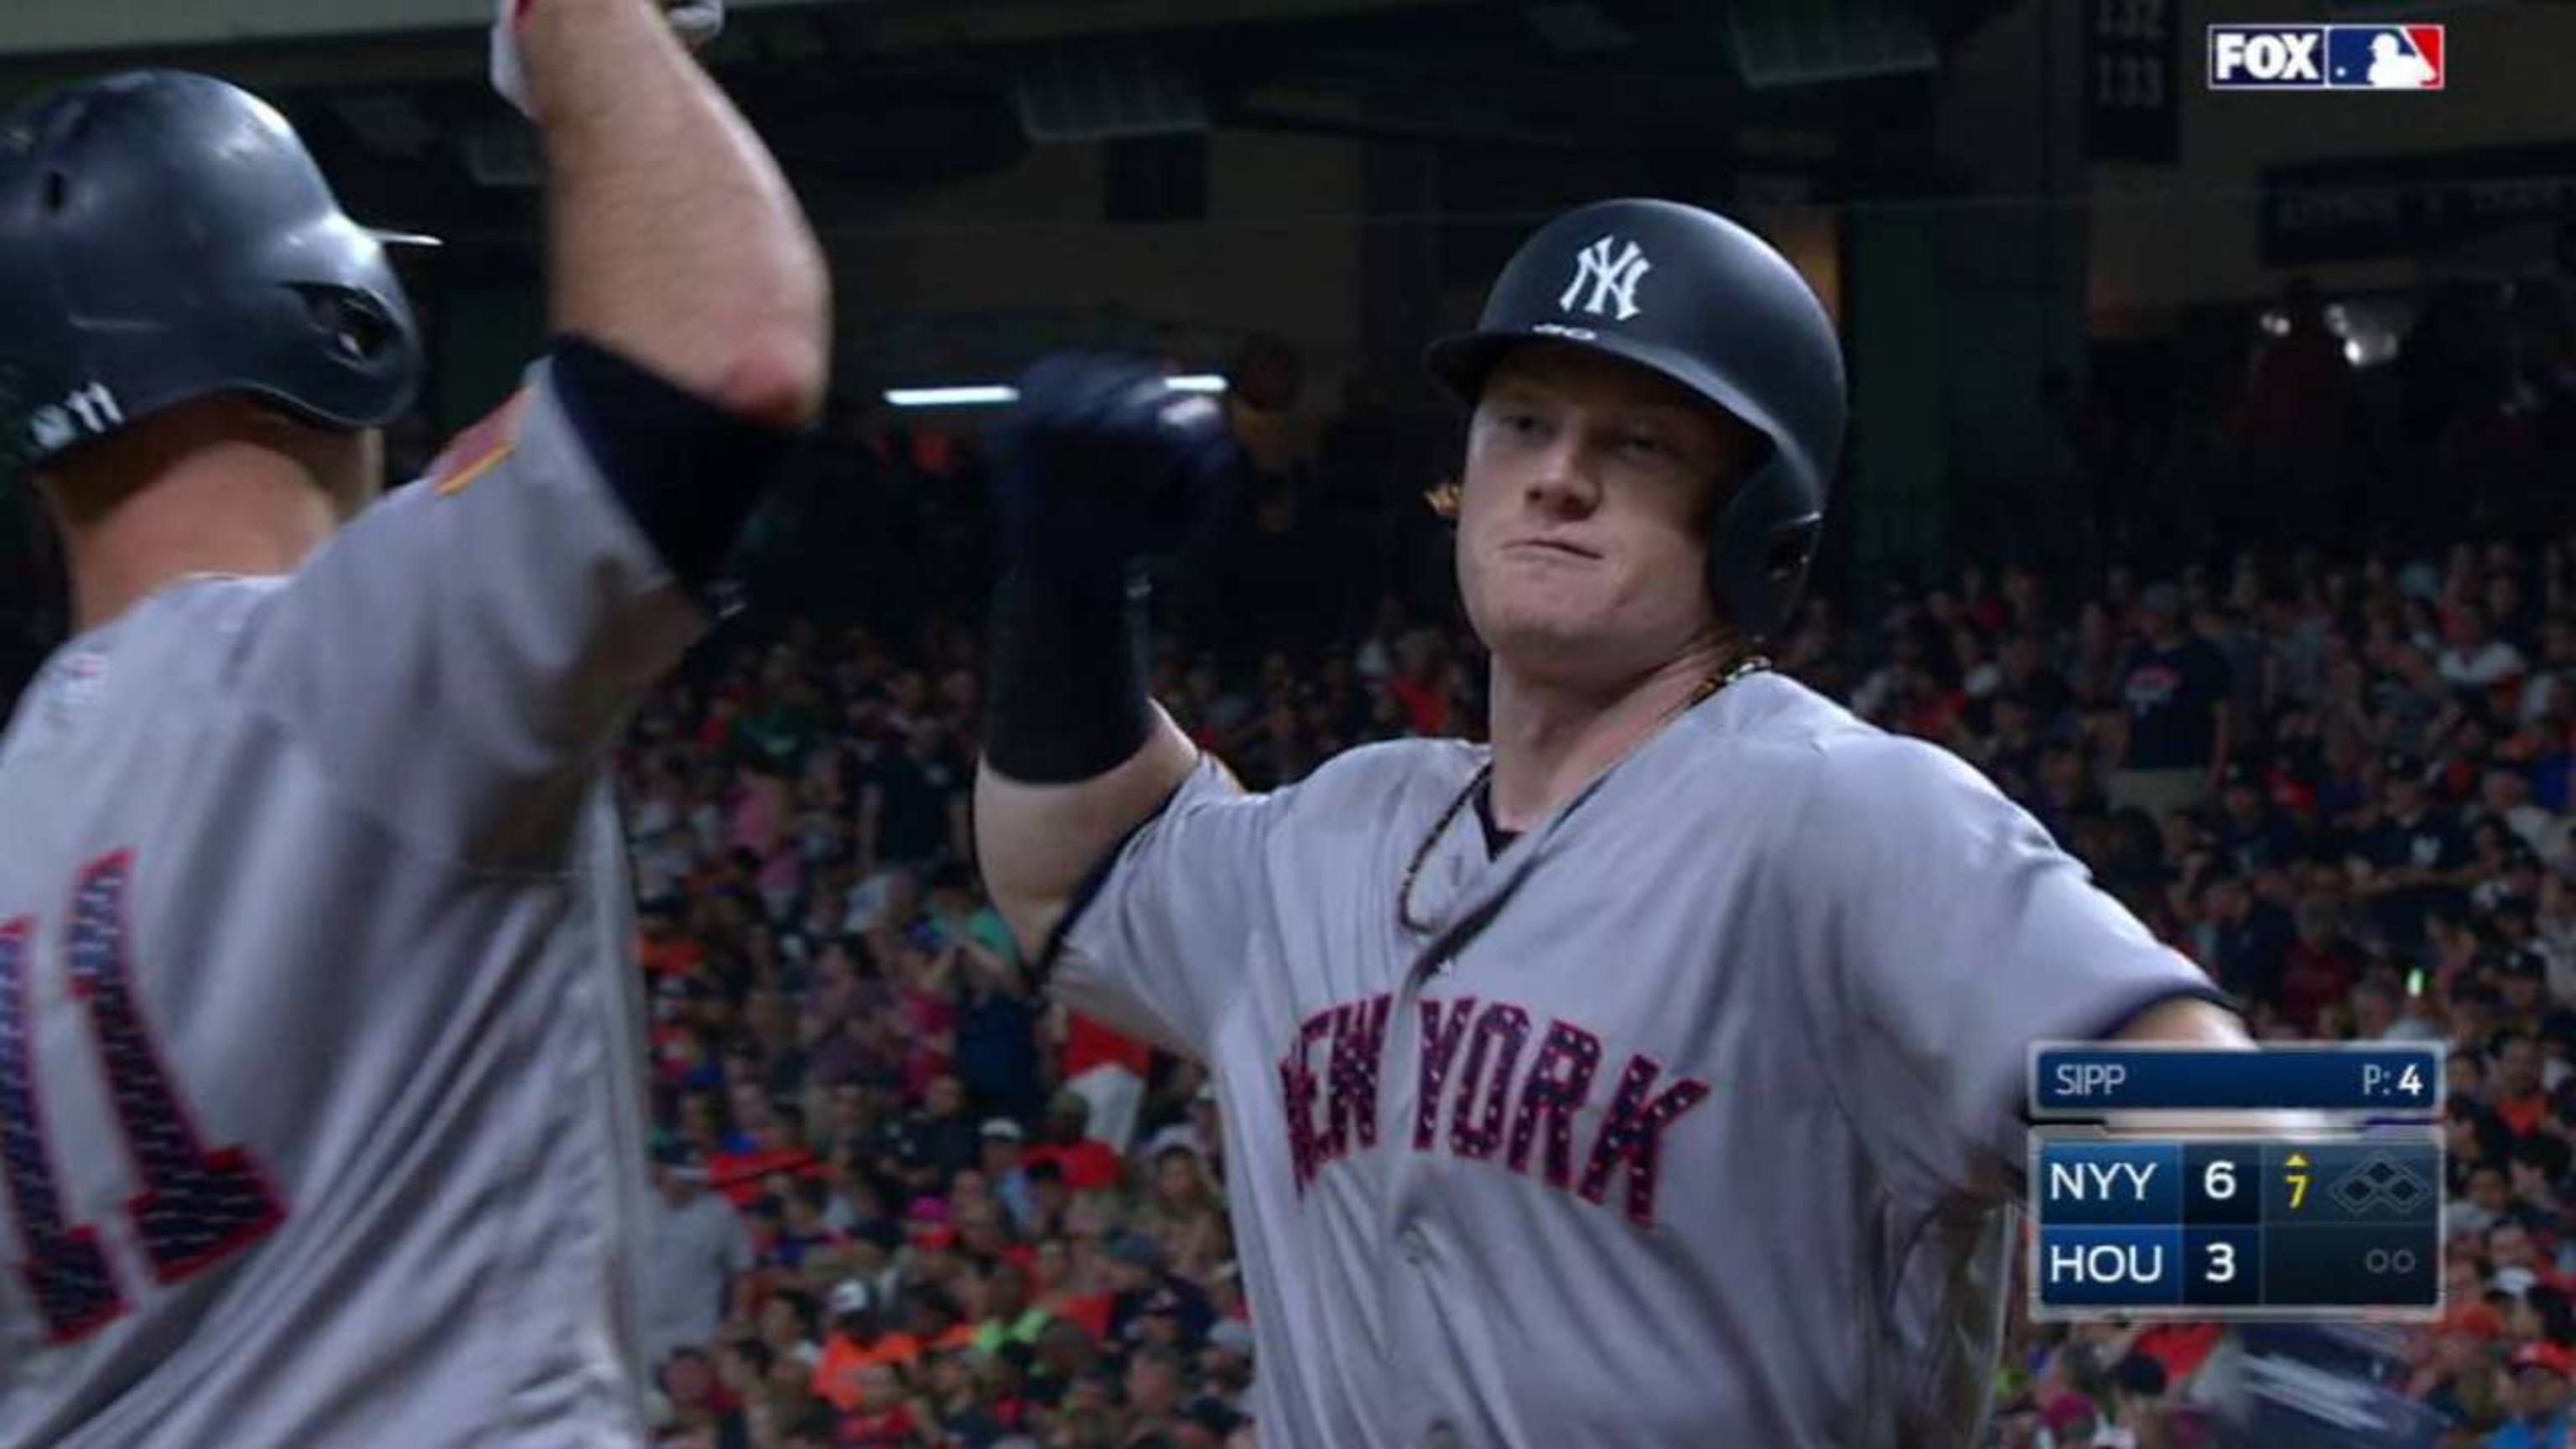 Clint Frazier, Didi Gregorius Hit Home Runs While Wearing Face Masks